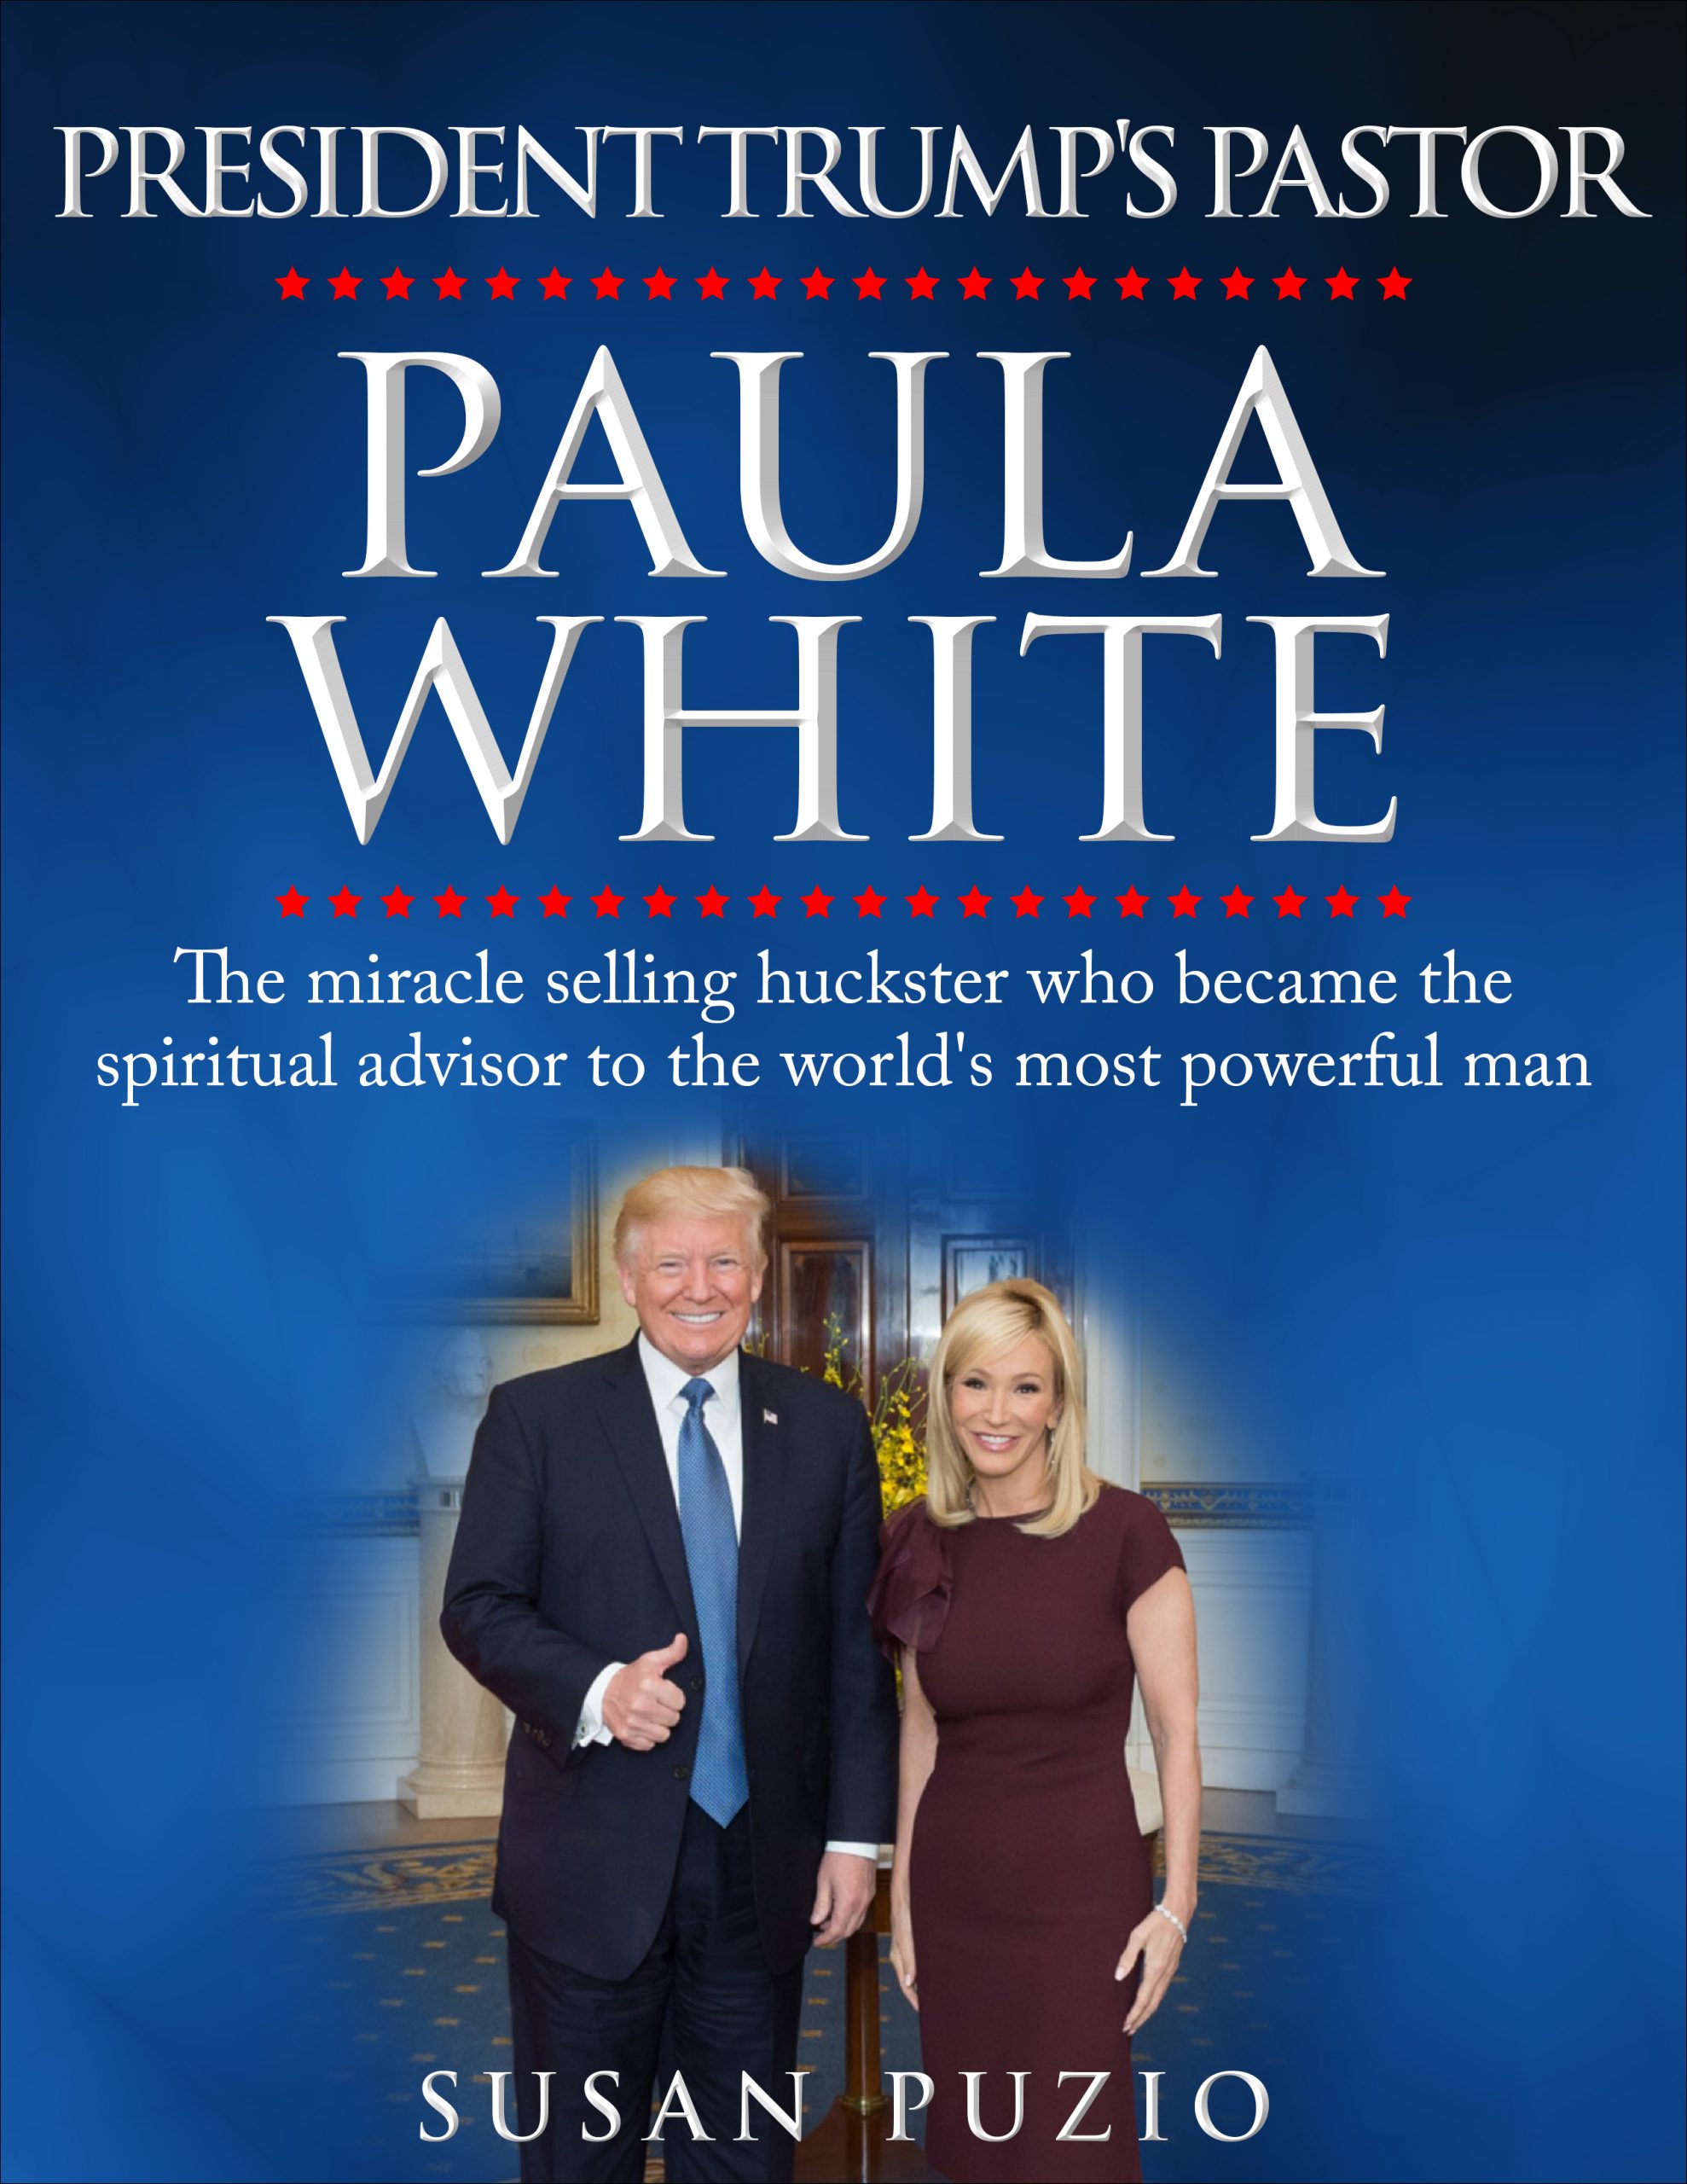 Book exposing the real Paula White-unauthorized Biography